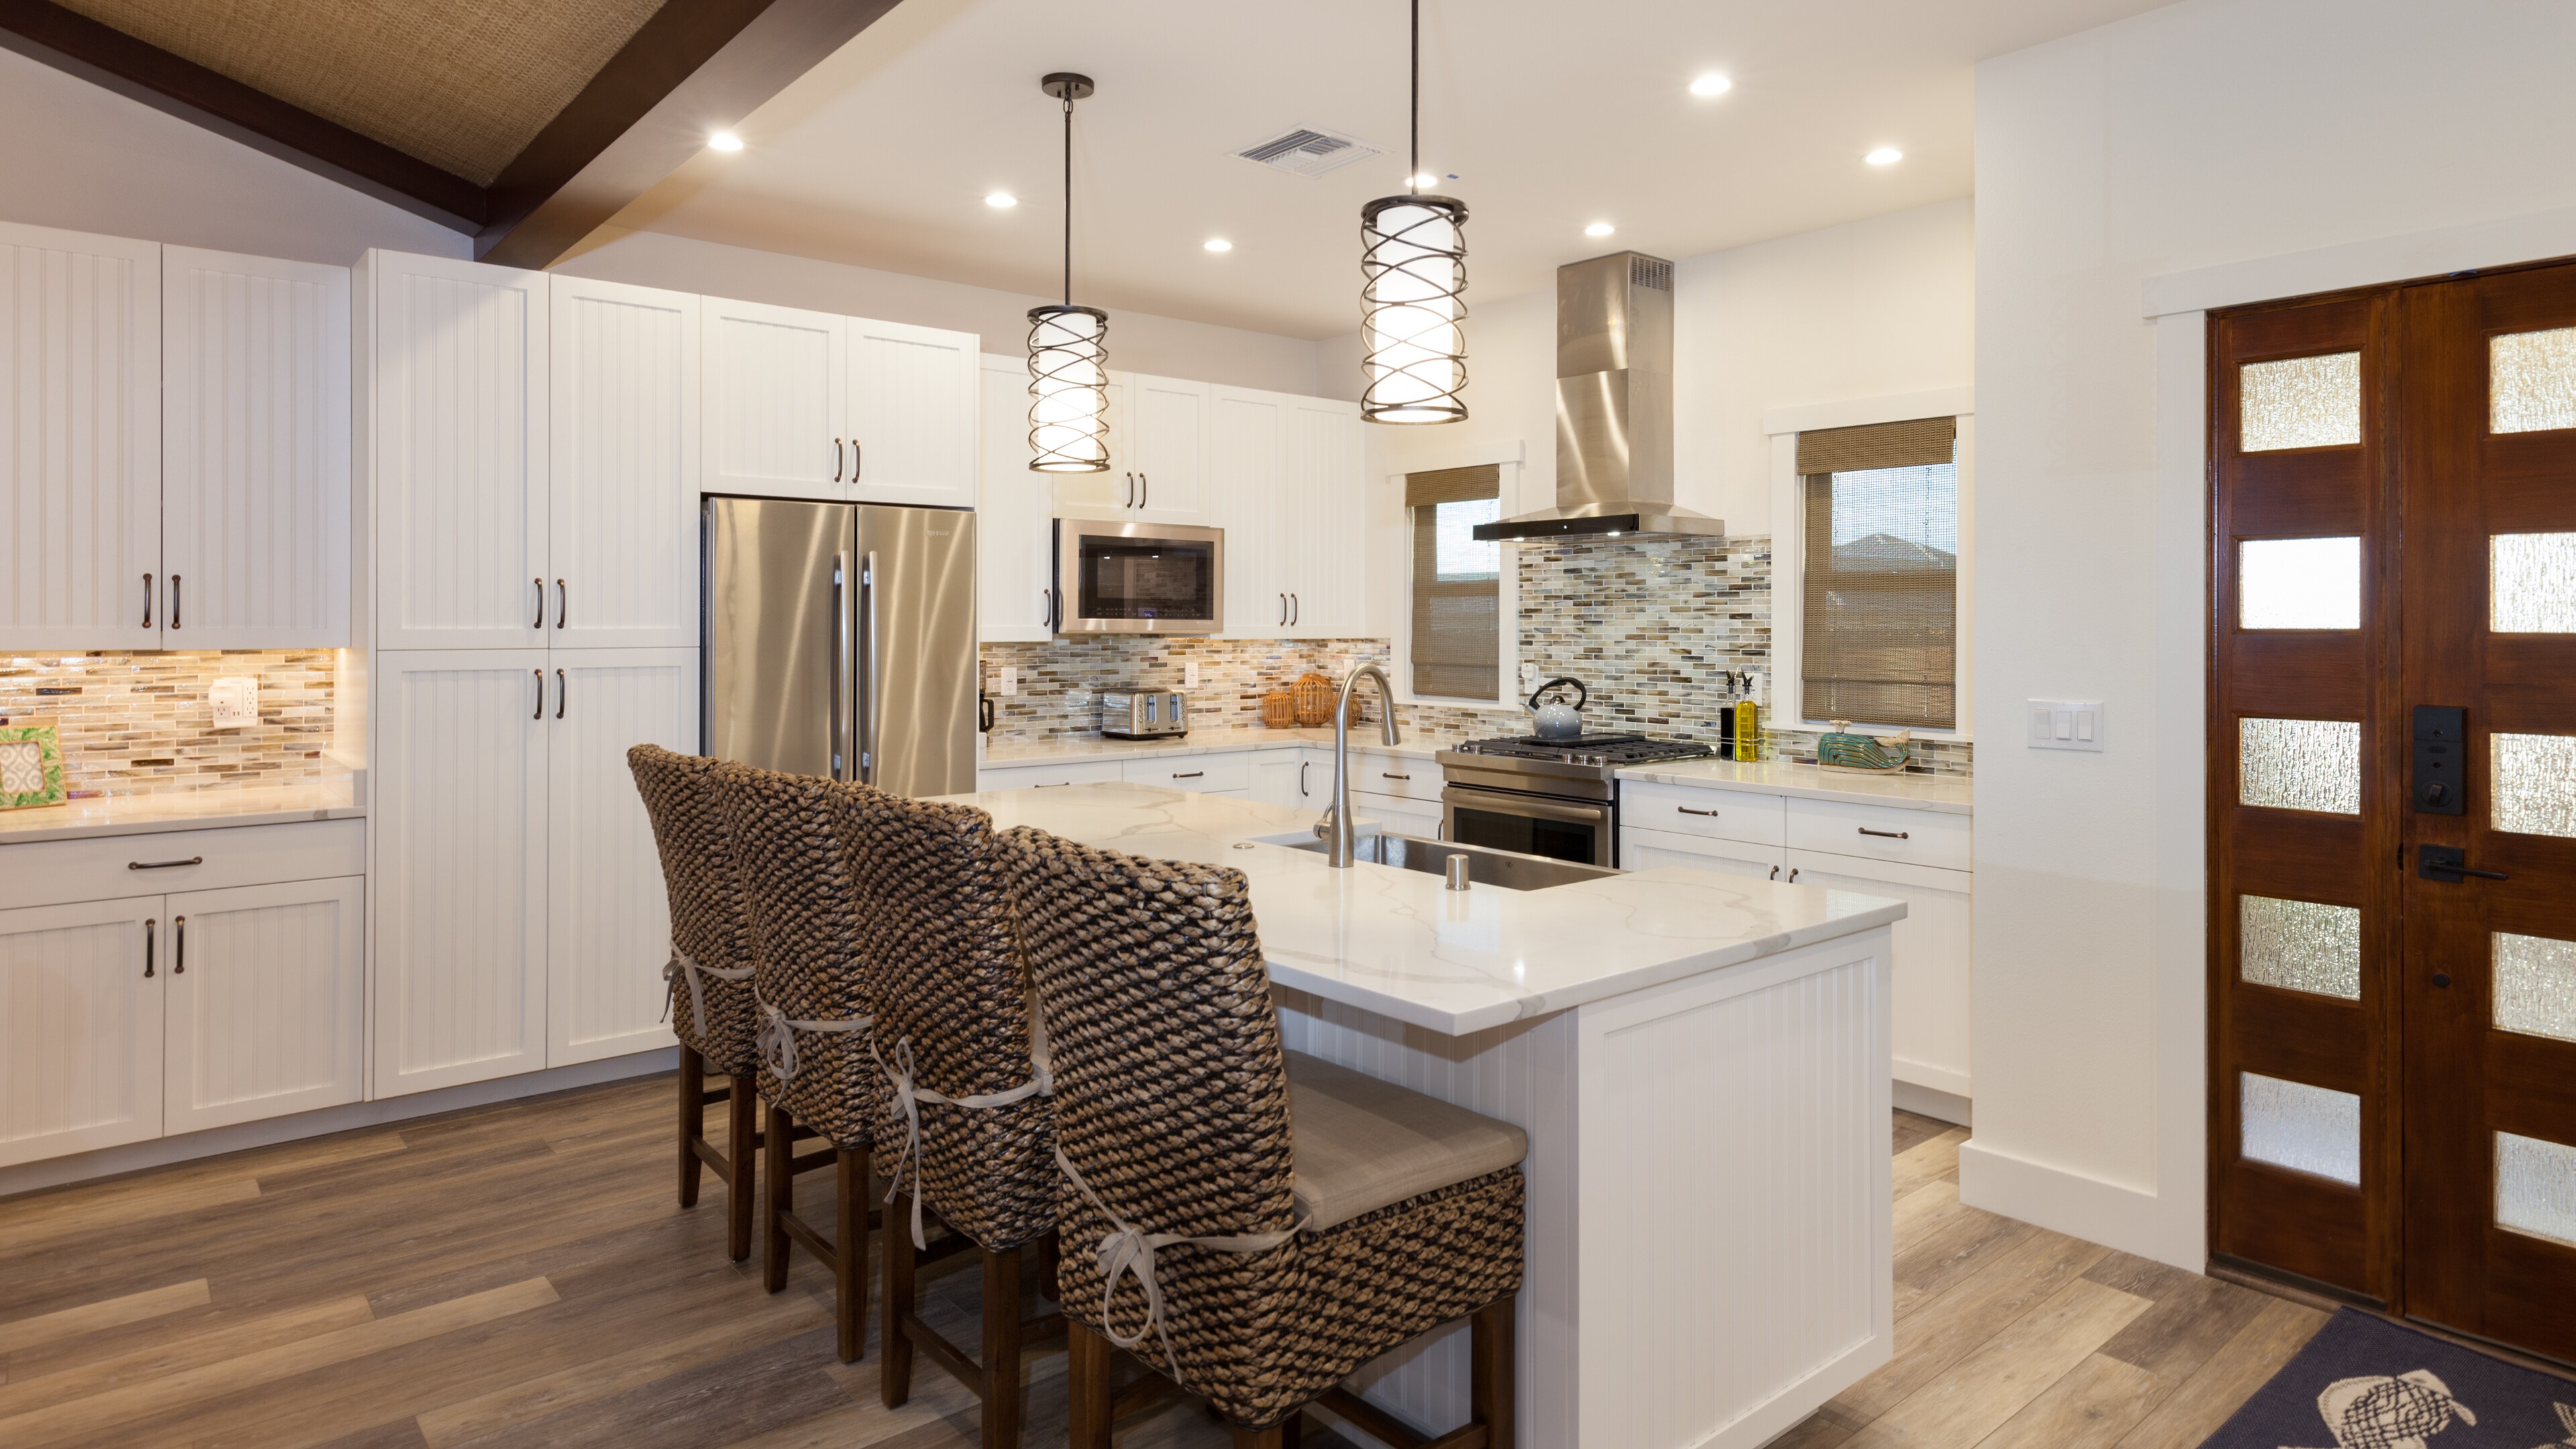 Gorgeous gourmet kitchen stocked with oils and spices, plus starter pack of Kona coffee